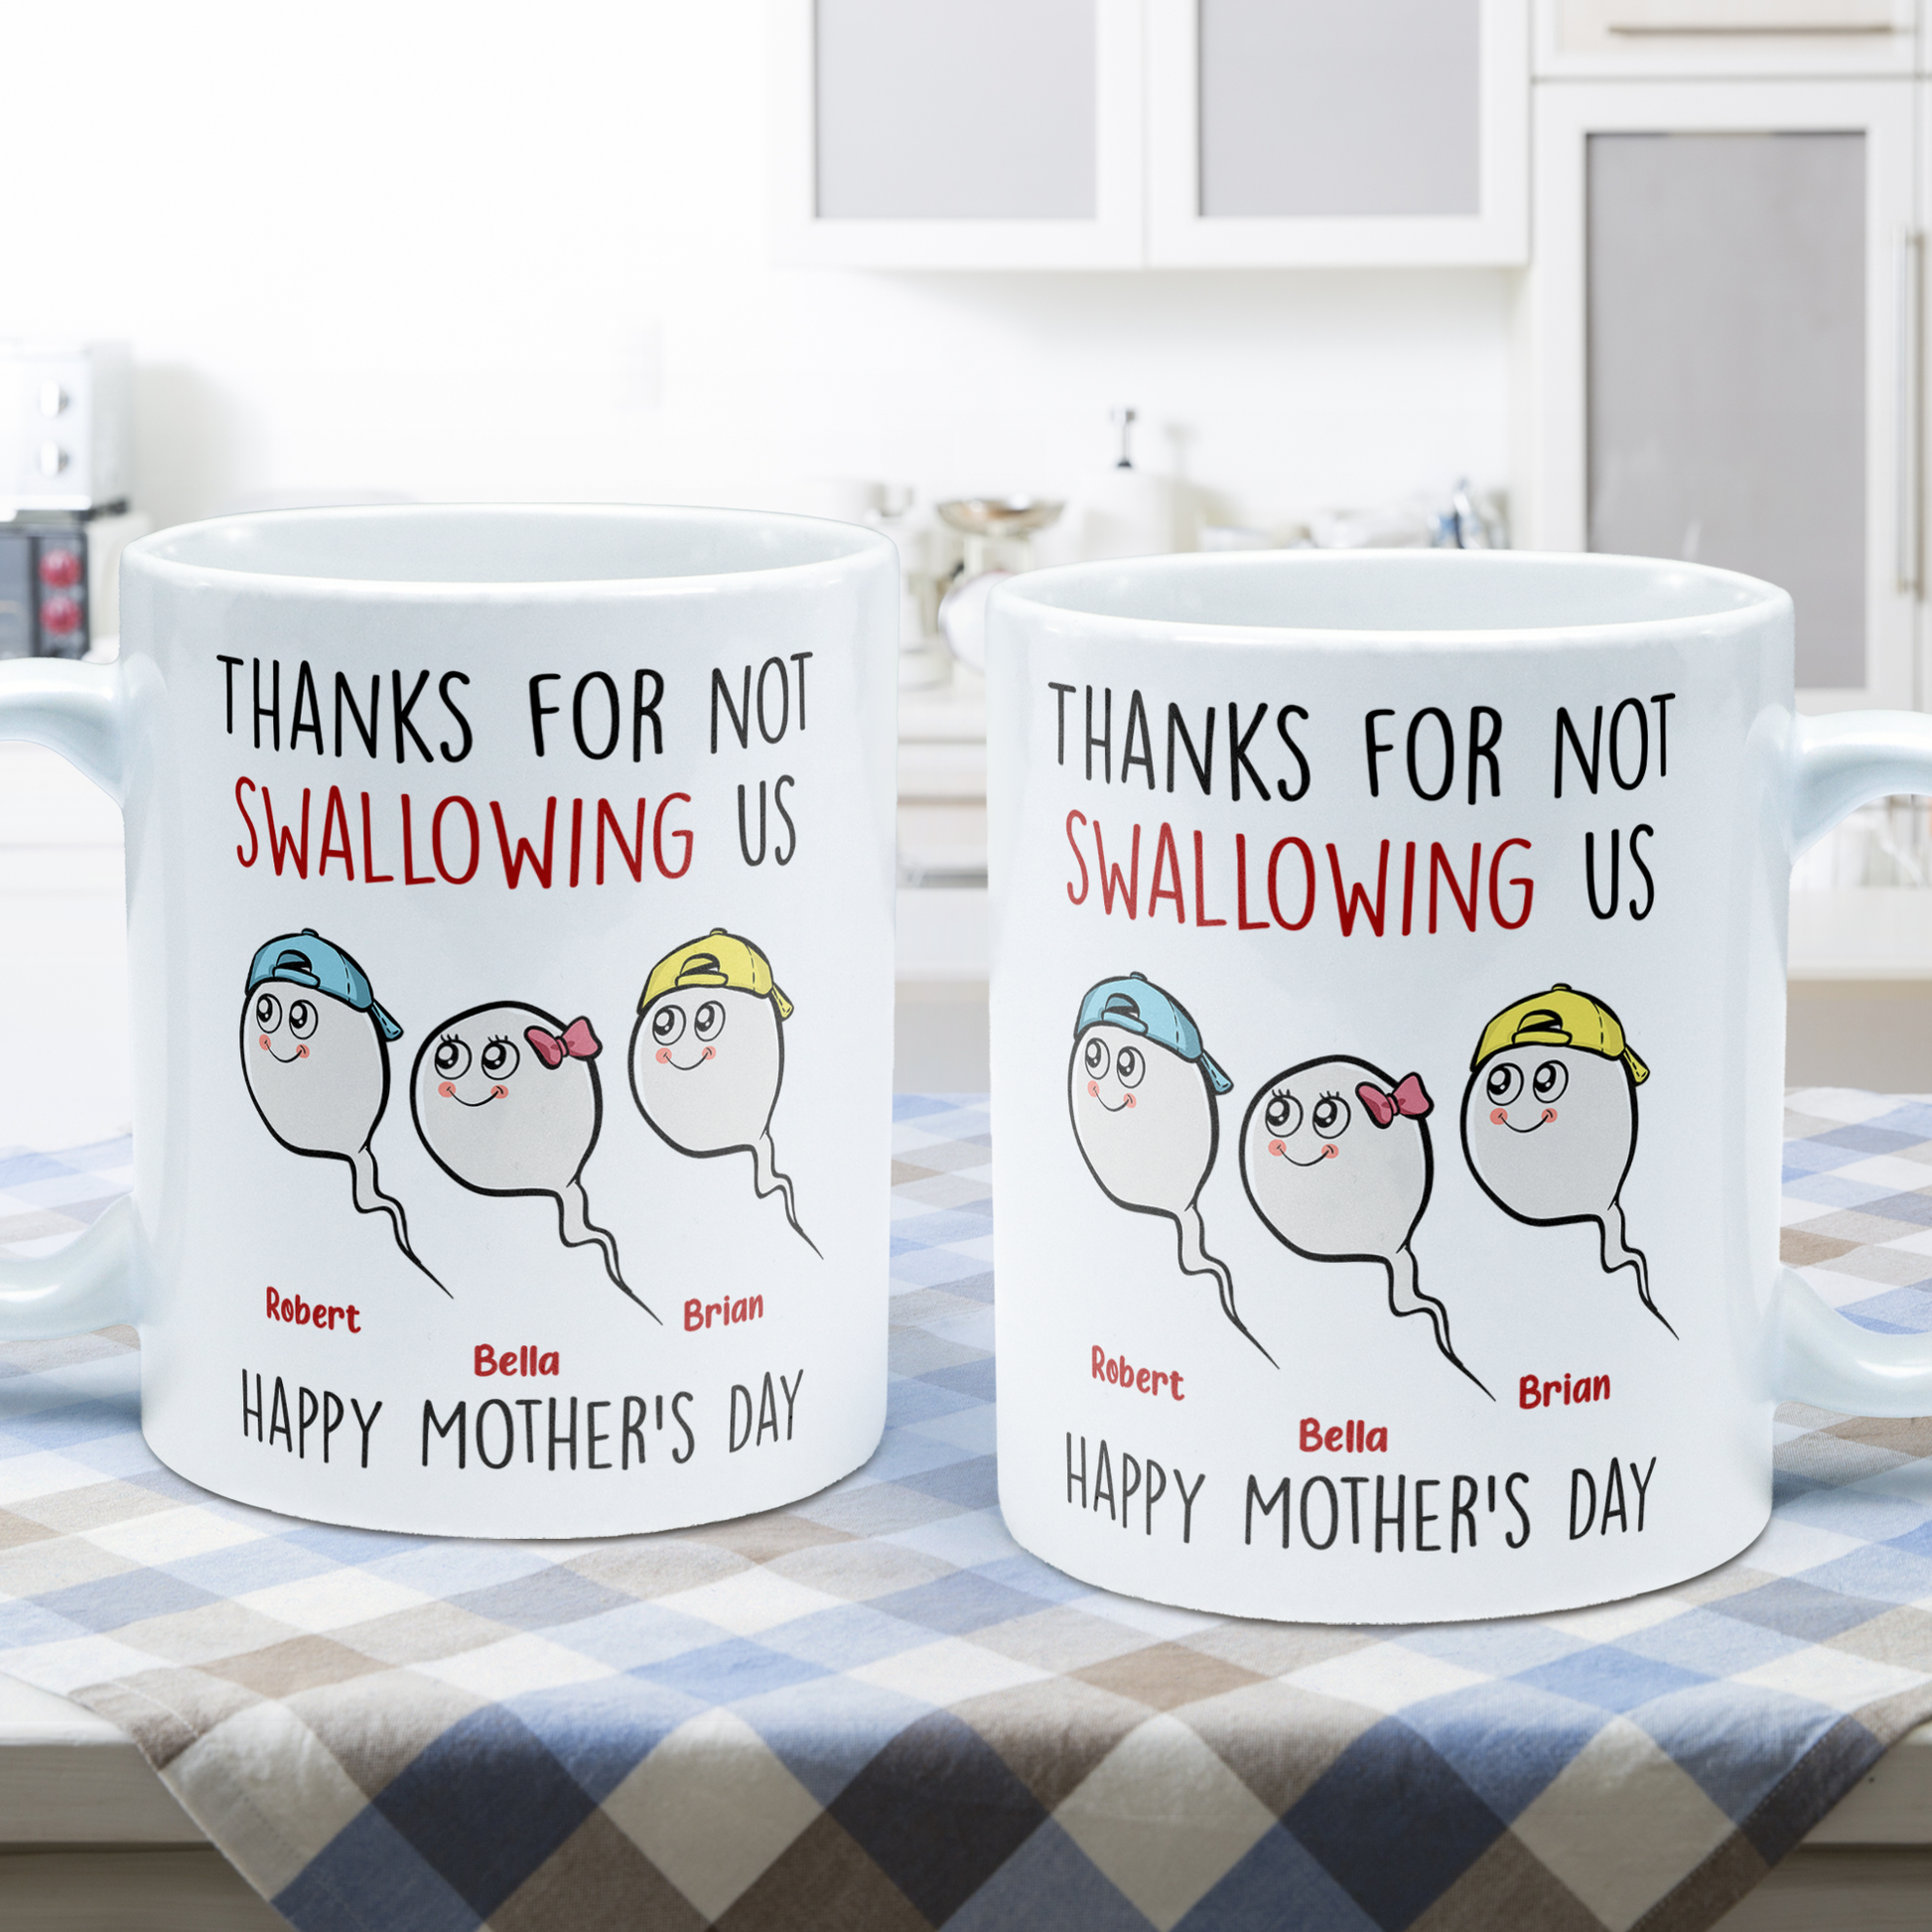 Gift For Mom, Mother's Day Gift, Funny Gift For Mom, Funny Mom Mug, Funny  Mother-in-law Gift, Funny Mother's Day Gift, Best Mom Gift